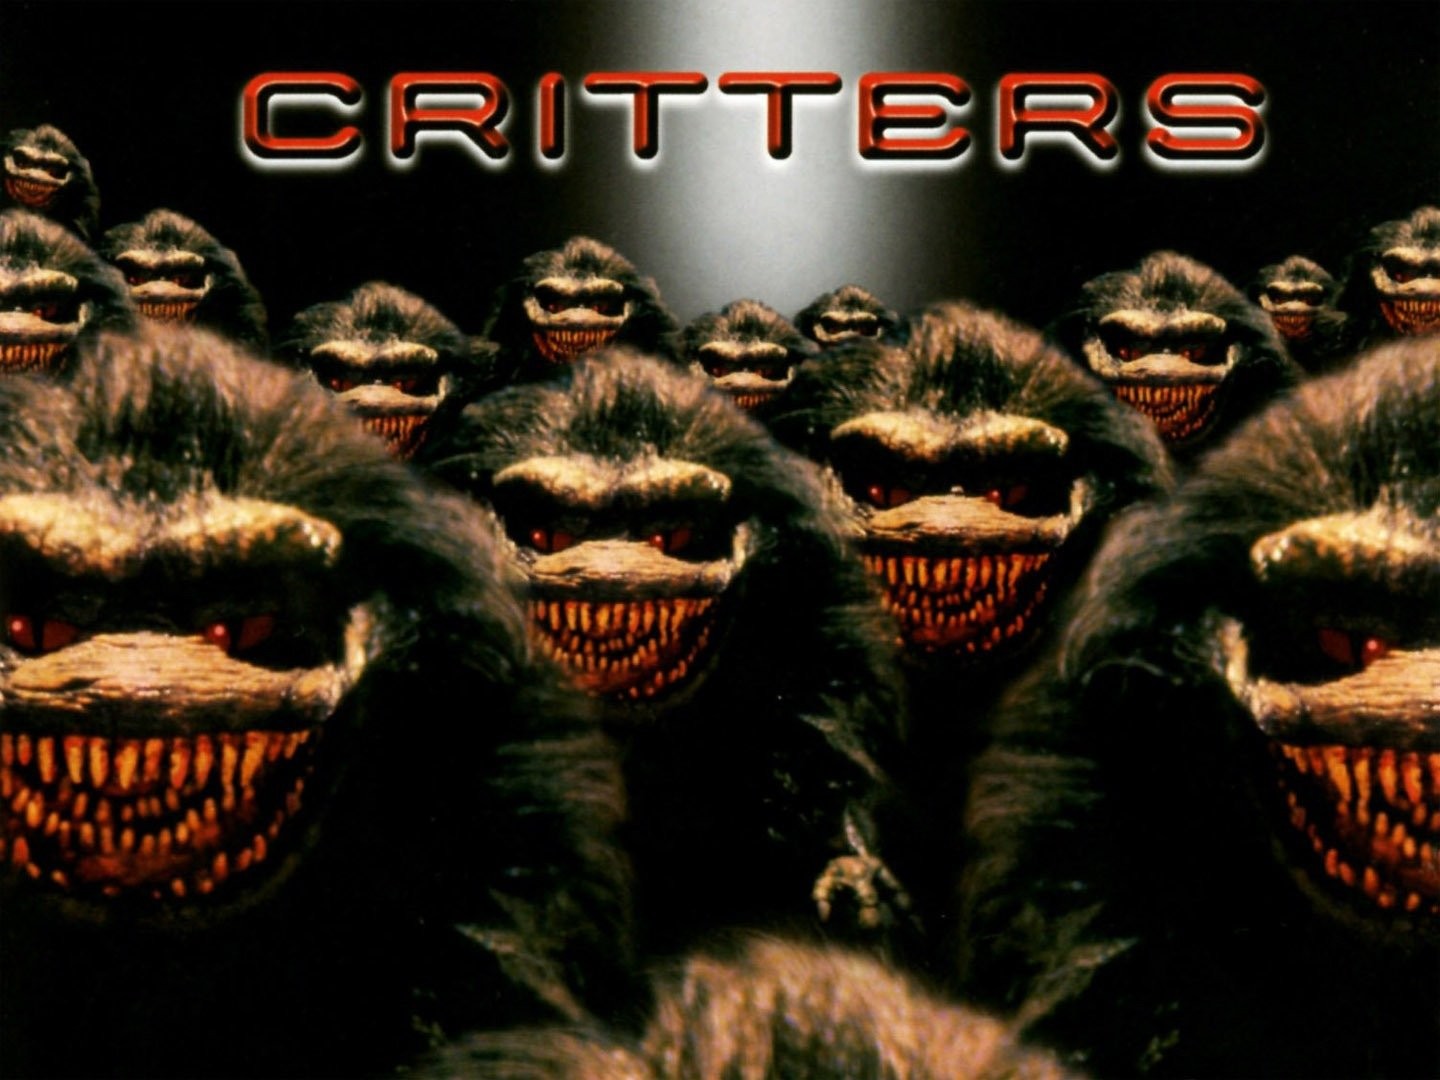 45-facts-about-the-movie-critters